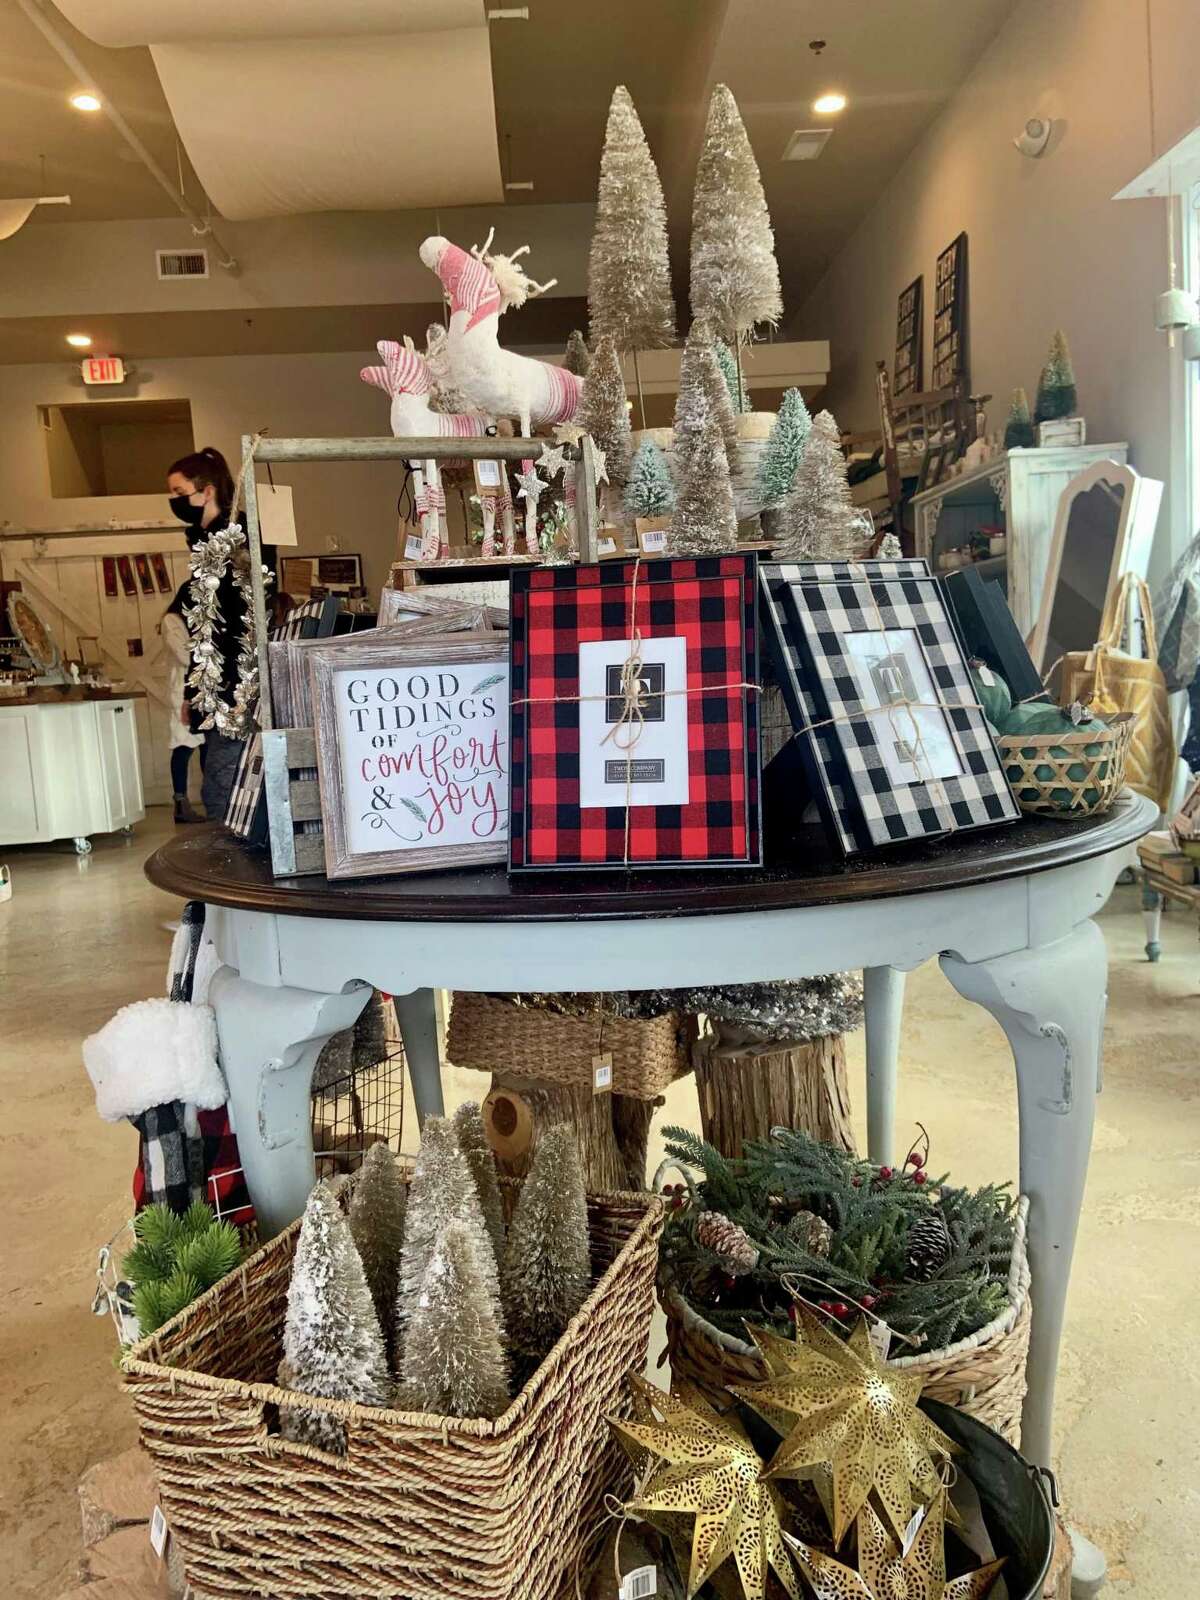 Staff at Pure Poetry, a gift shop on Madison Avenue in Trumbull, finished setting up this Christmas display on Black Friday. Small Business Saturday is a bigger day for the locally owned shop, owner Portia Antonio said.